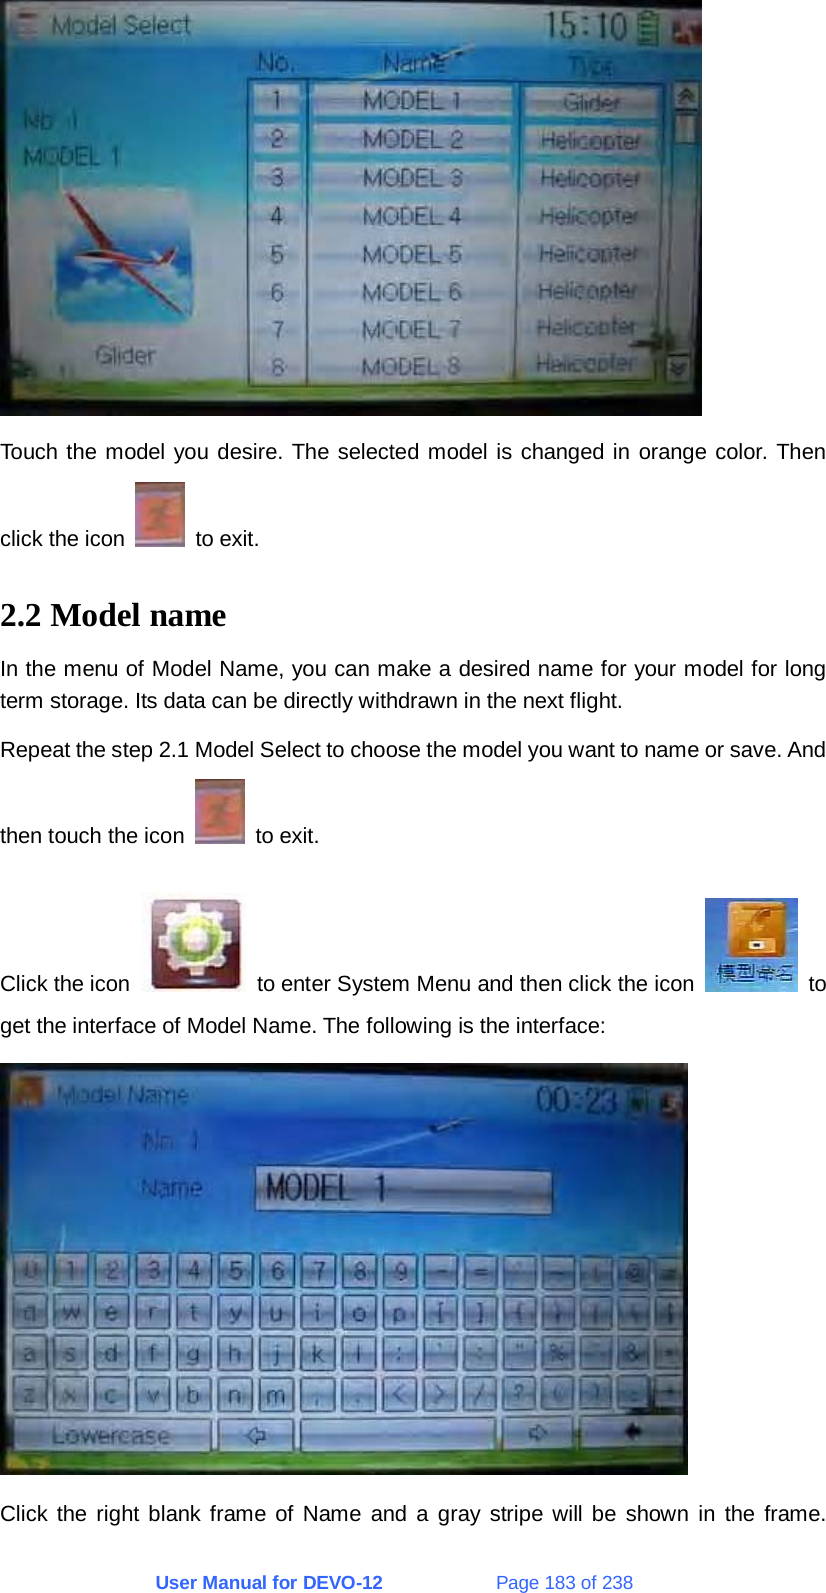 User Manual for DEVO-12             Page 183 of 238  Touch the model you desire. The selected model is changed in orange color. Then click the icon   to exit. 2.2 Model name In the menu of Model Name, you can make a desired name for your model for long term storage. Its data can be directly withdrawn in the next flight. Repeat the step 2.1 Model Select to choose the model you want to name or save. And then touch the icon   to exit. Click the icon    to enter System Menu and then click the icon   to get the interface of Model Name. The following is the interface:  Click the right blank frame of Name and a gray stripe will be shown in the frame.  